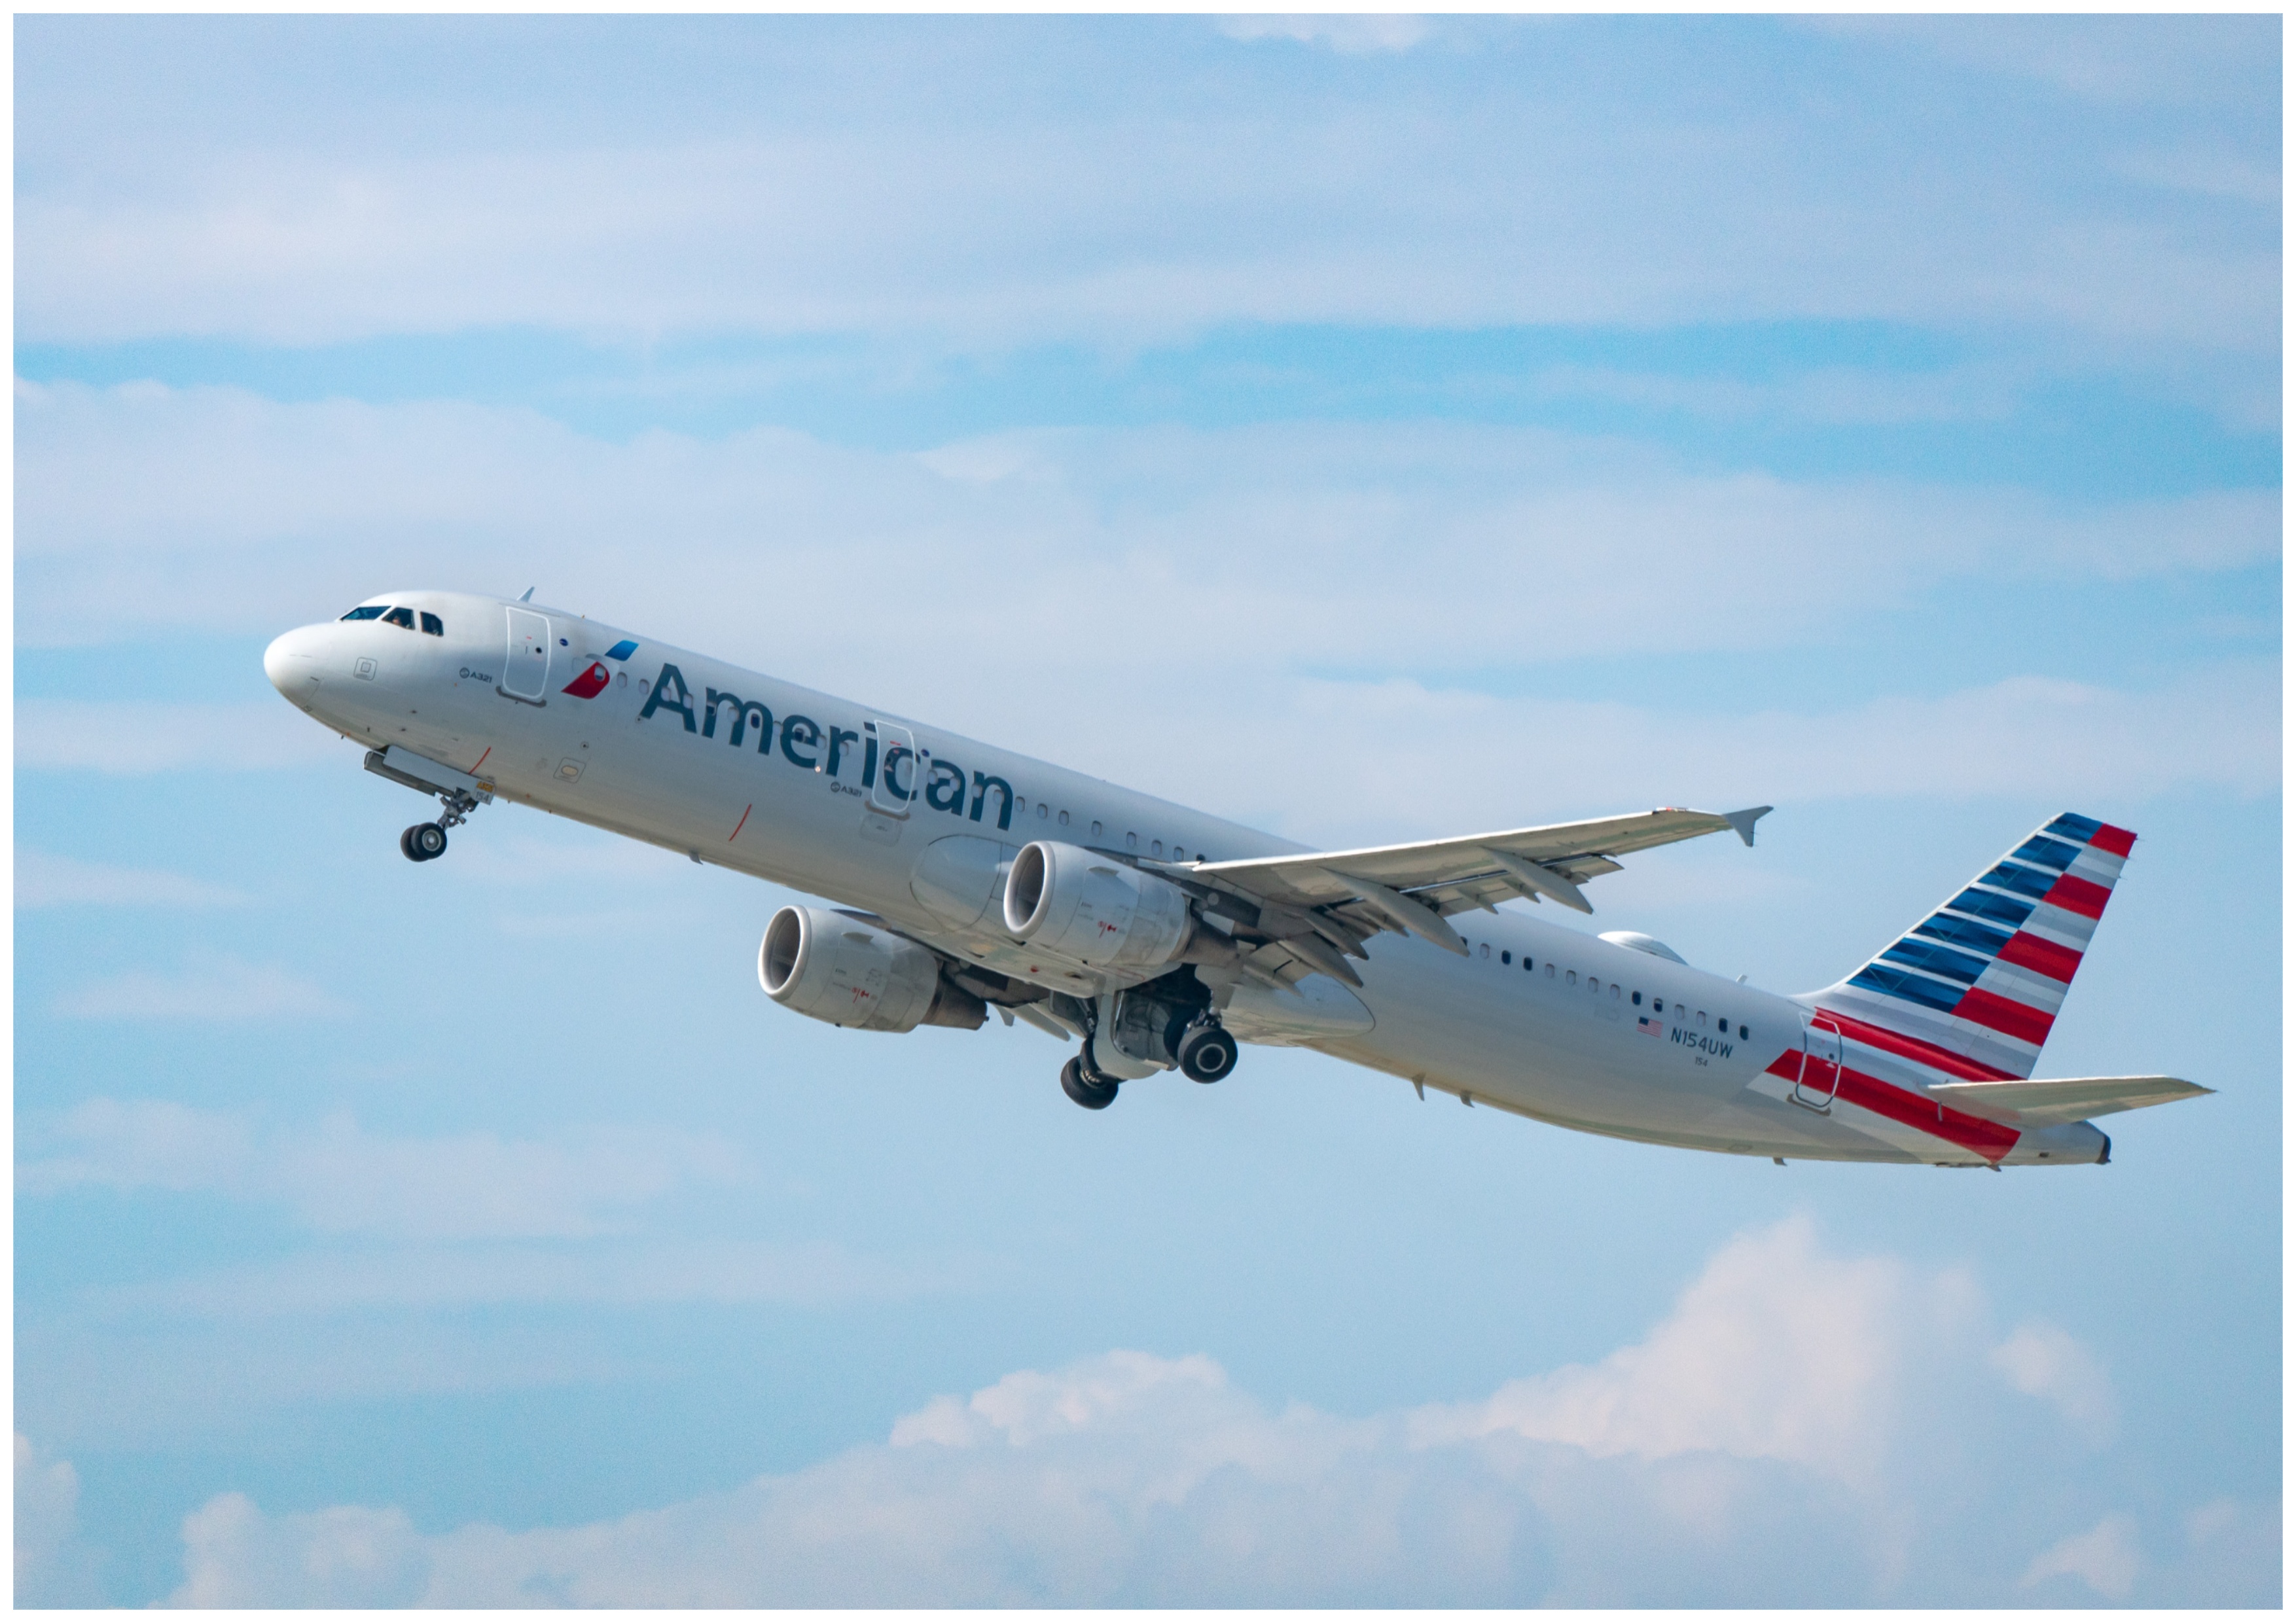 Teenage Girl Finds Hidden Camera on American Airlines Plane Toilet image